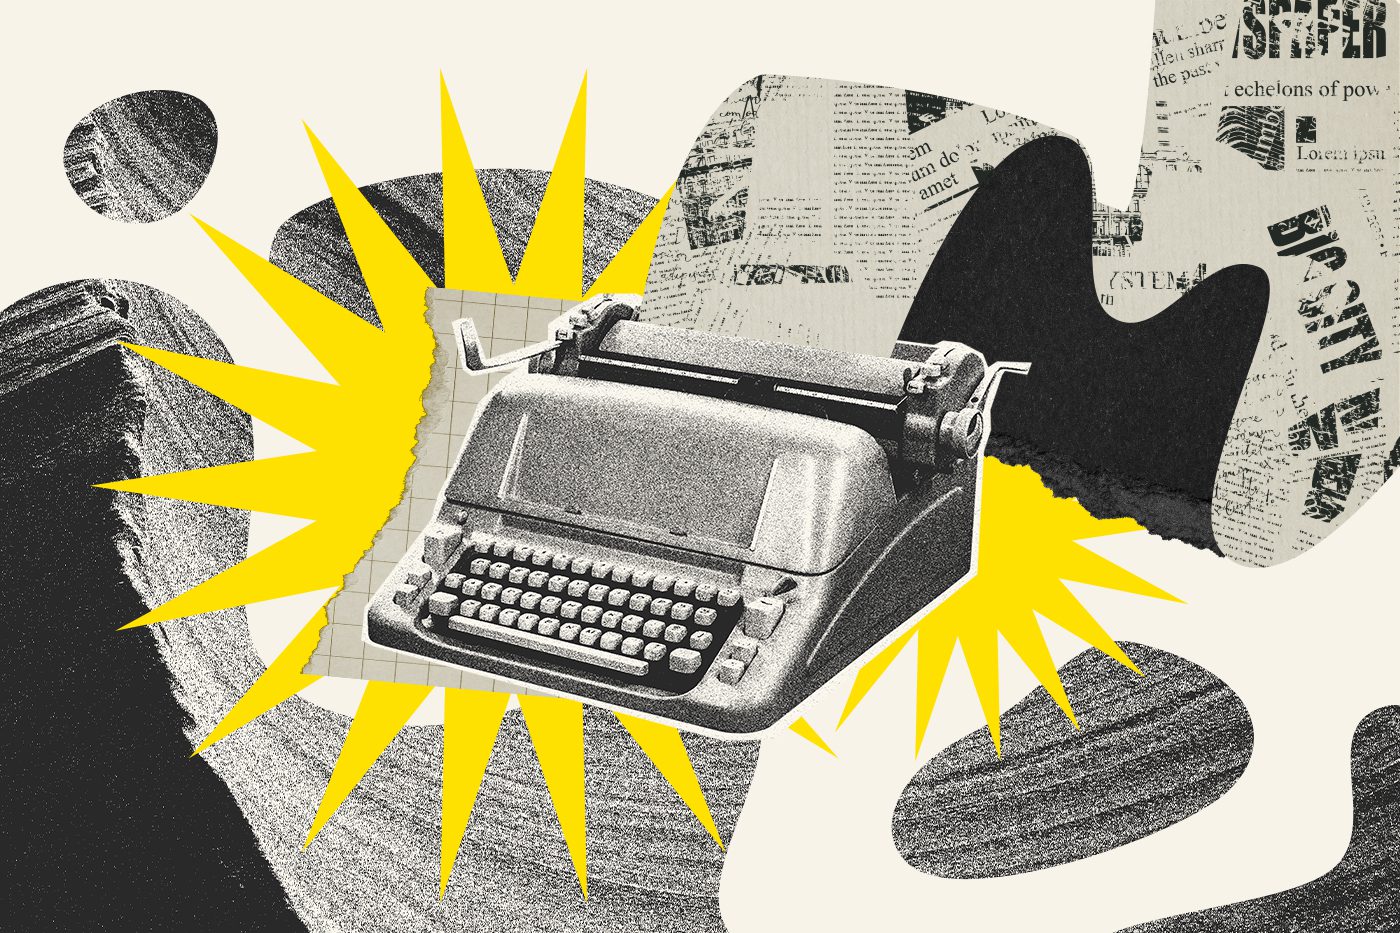 Collage featuring a typewriter